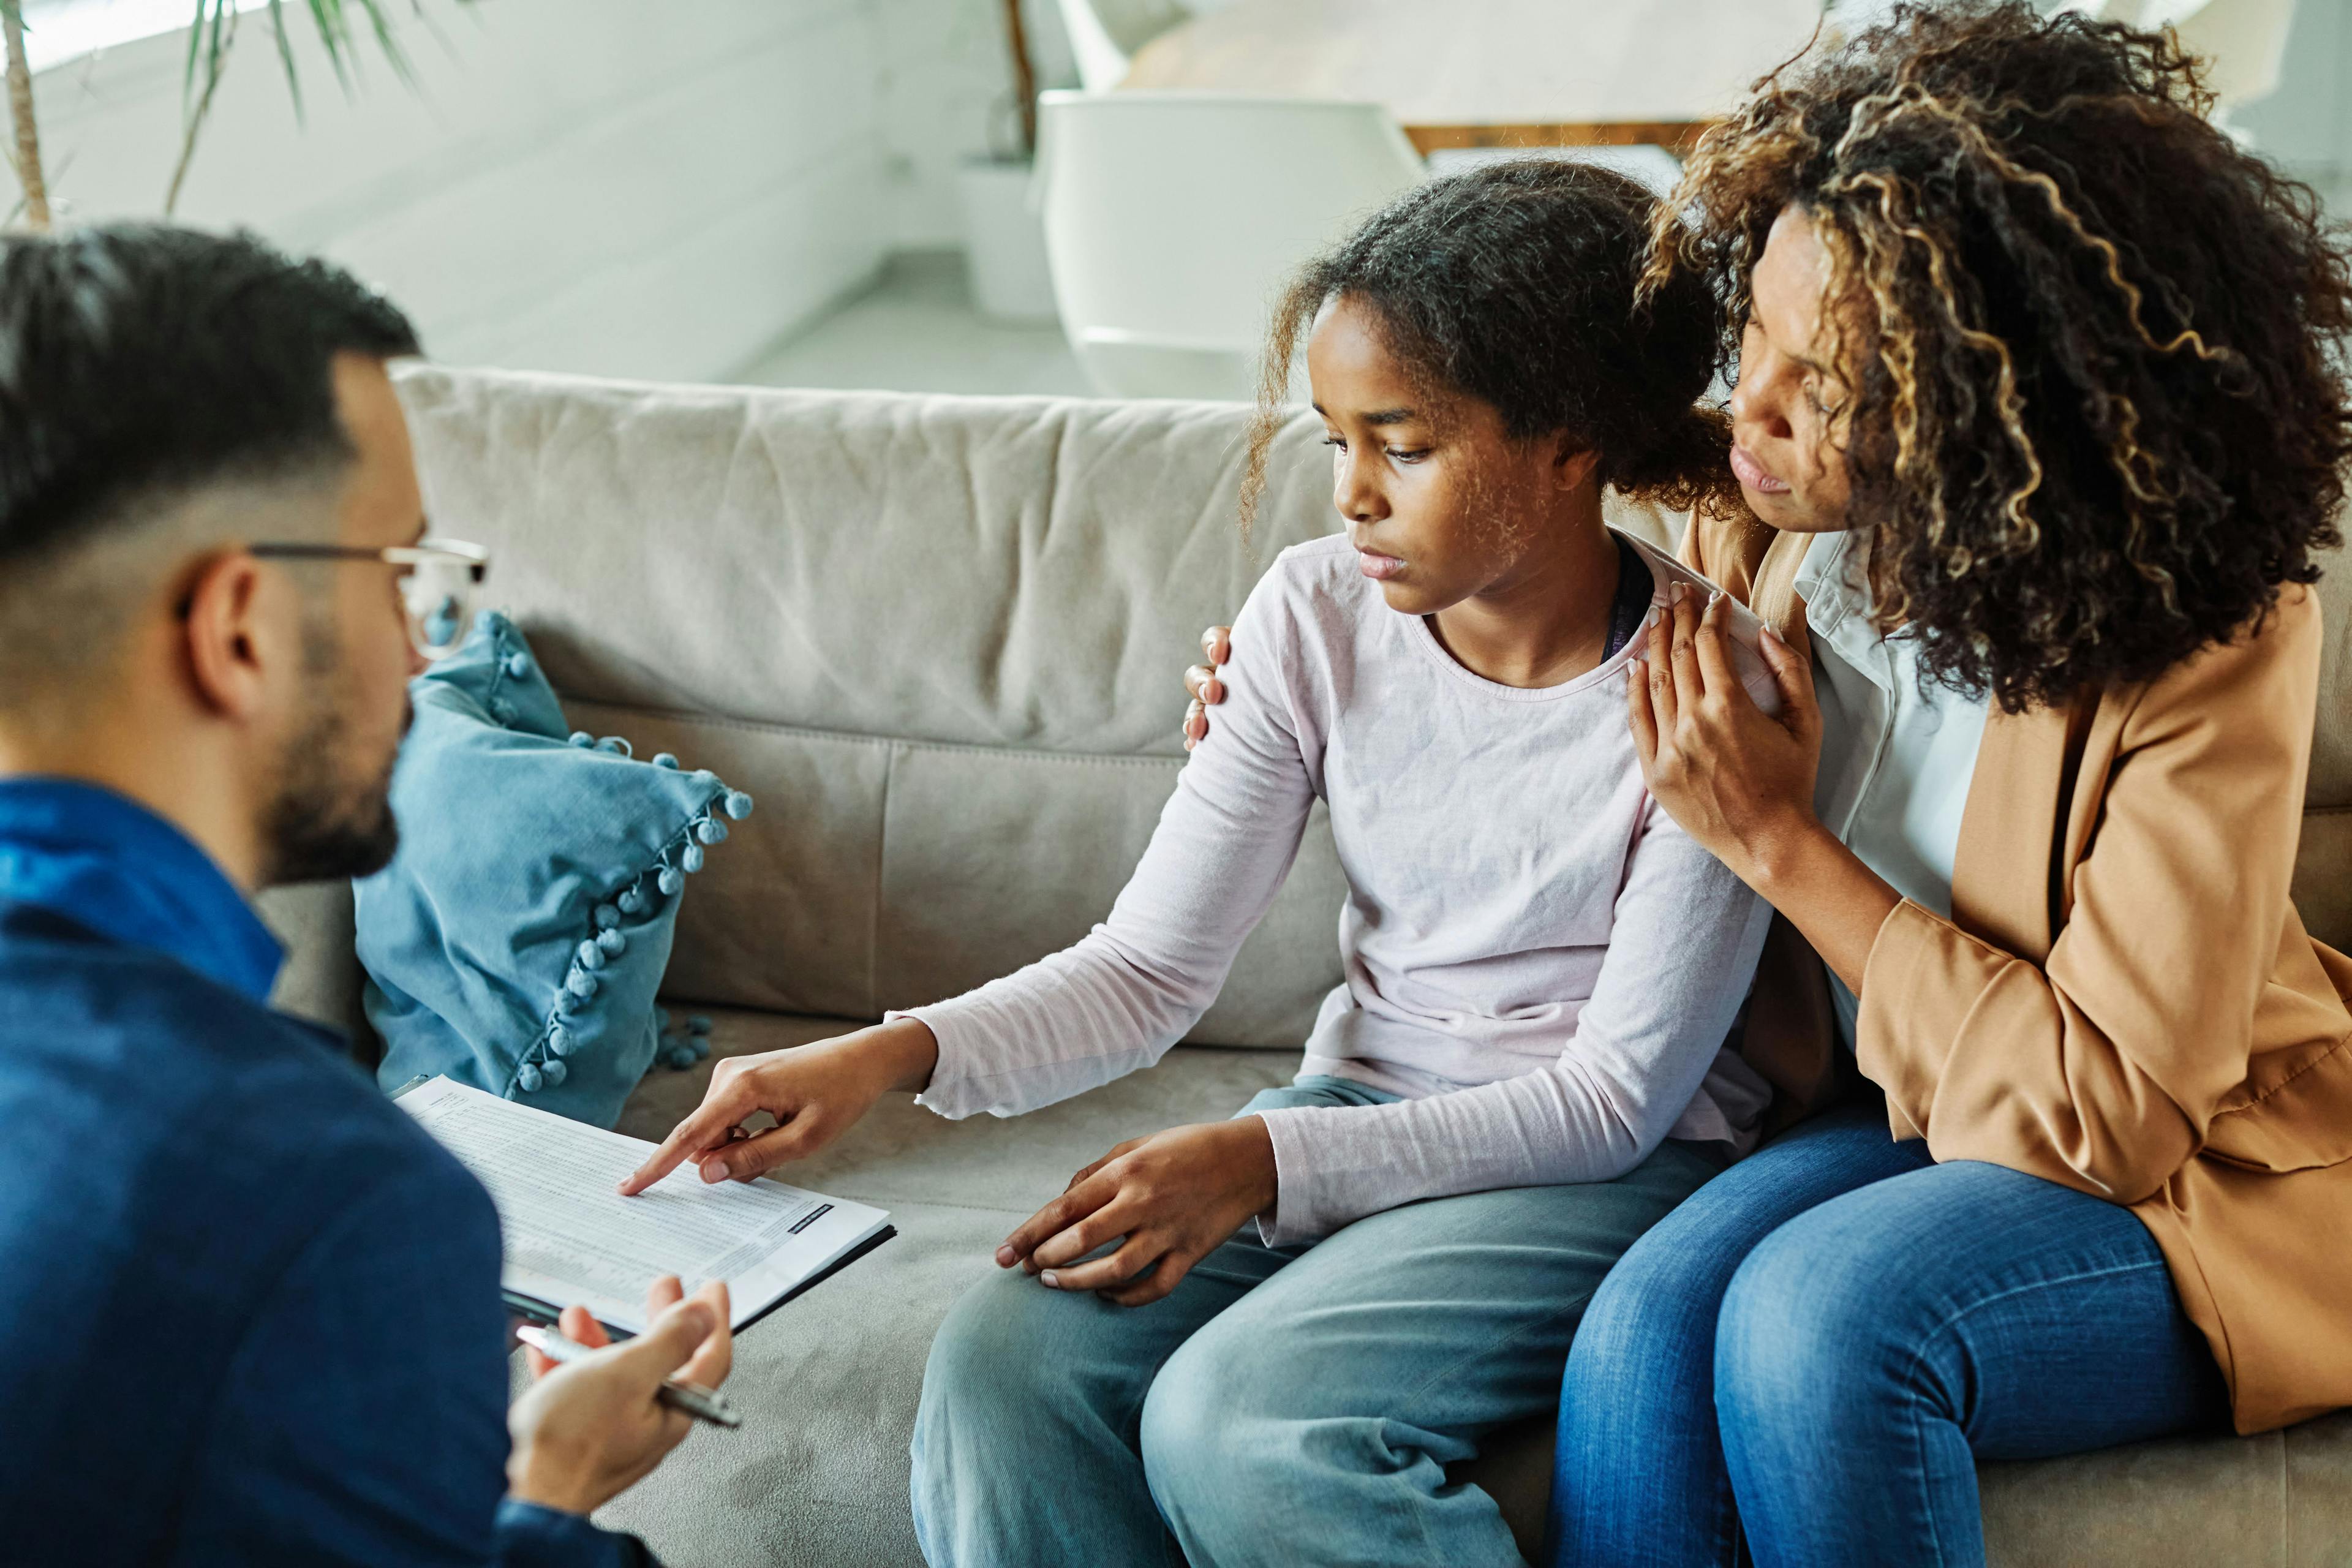 A total of 895 participants (92.1%) reported that they wanted their child screened for mental health programs at regular intervals. Image Credit: Adobe Stock - Lumos sp